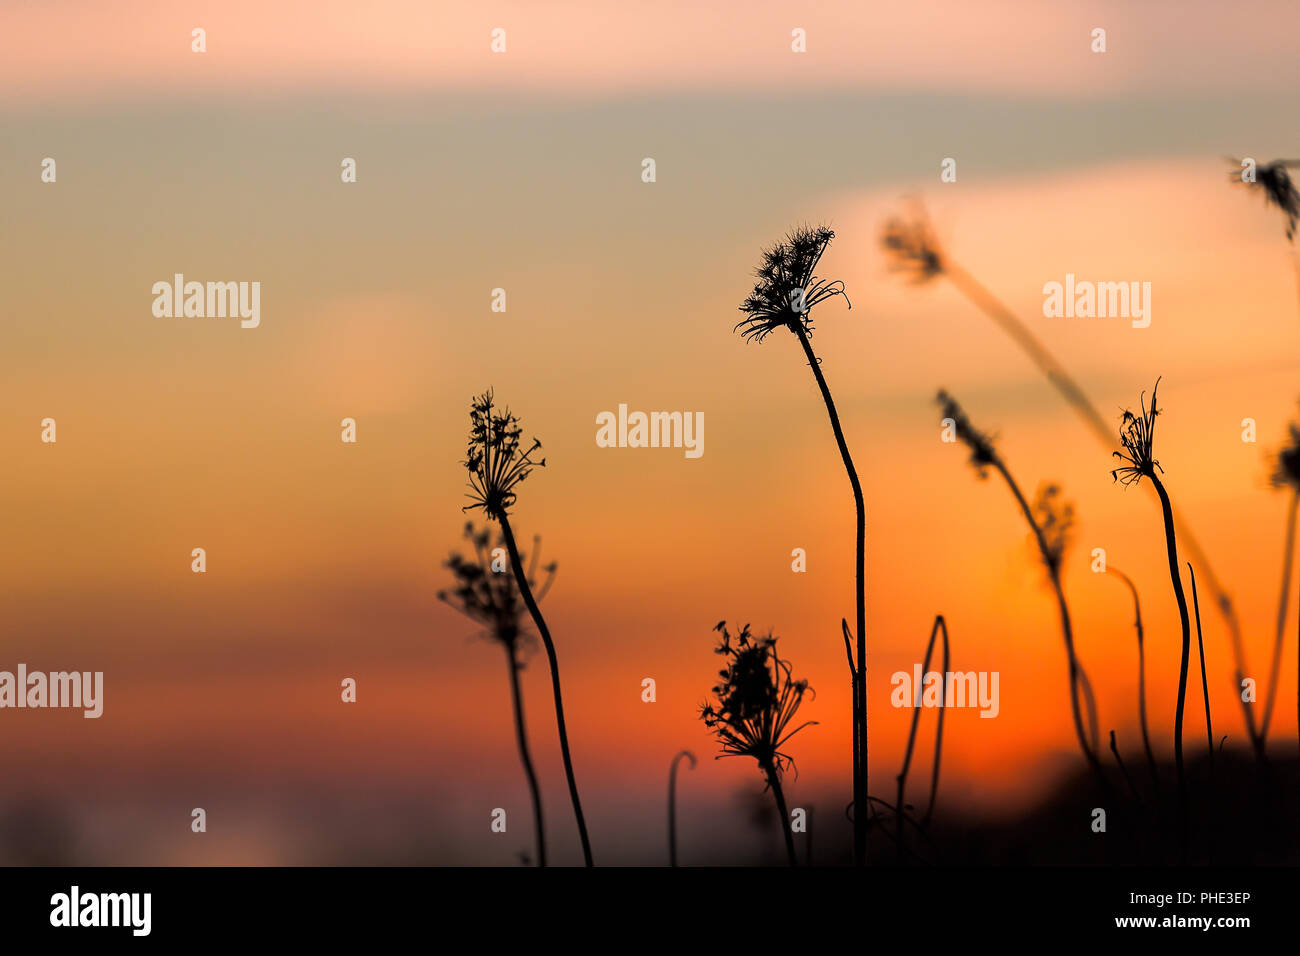 Dried dead weeds silhouetted against a sunset. Stock Photo